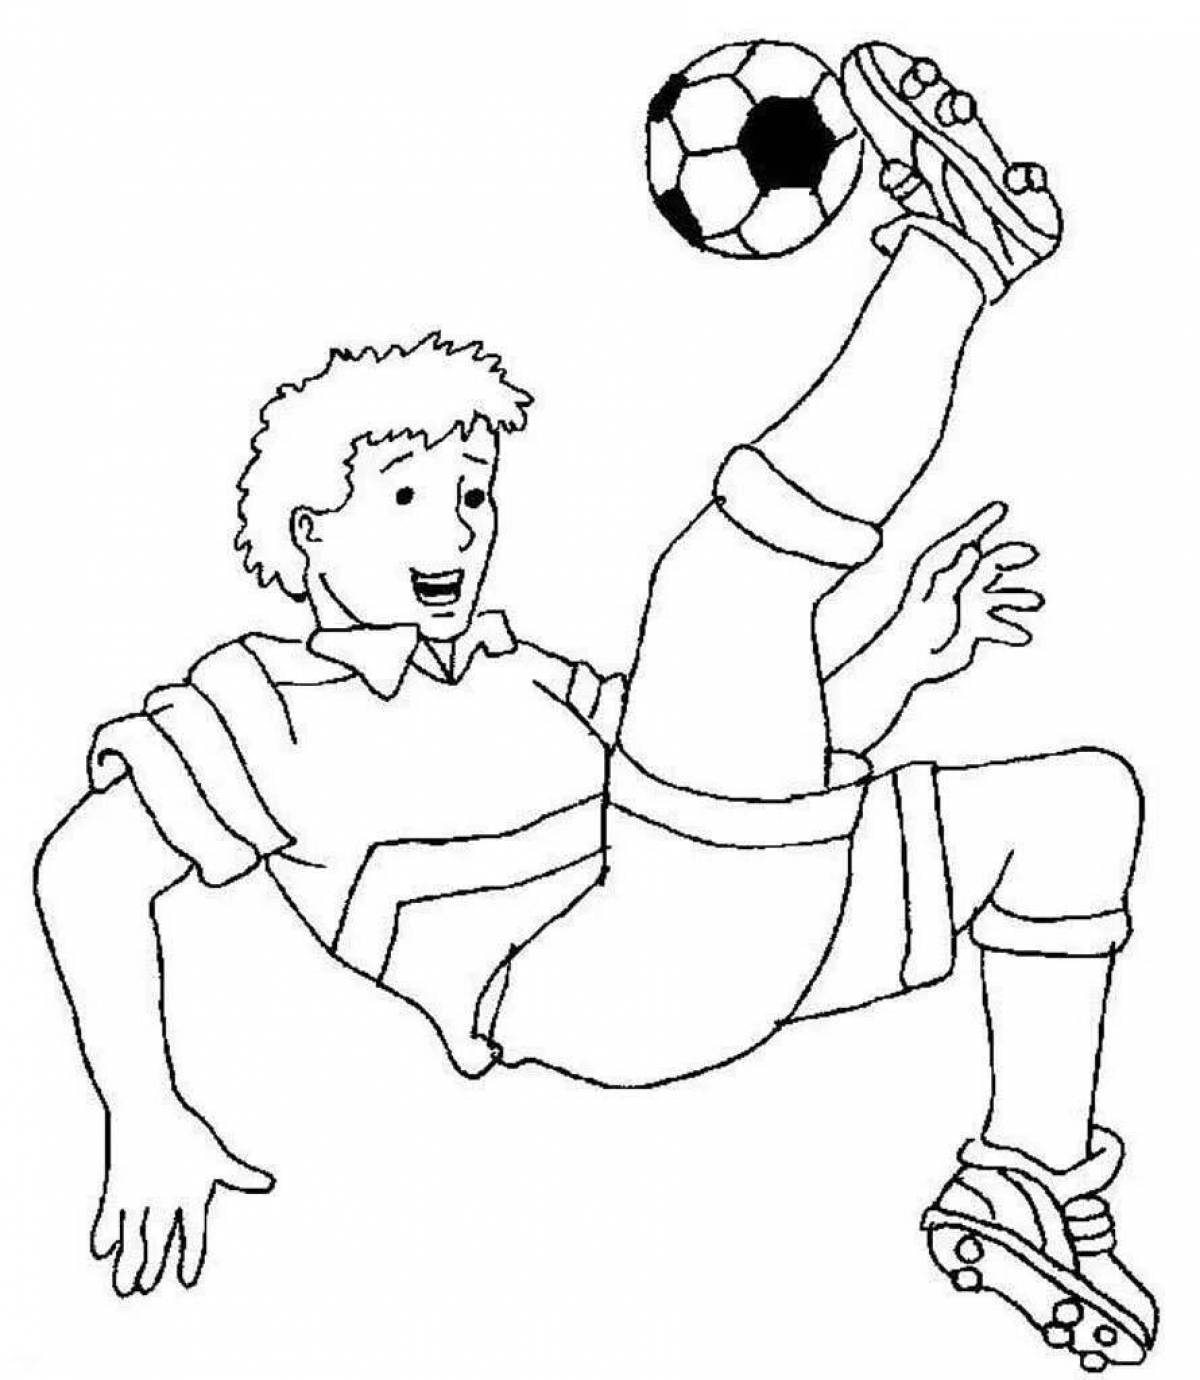 Coloring book exciting football for boys